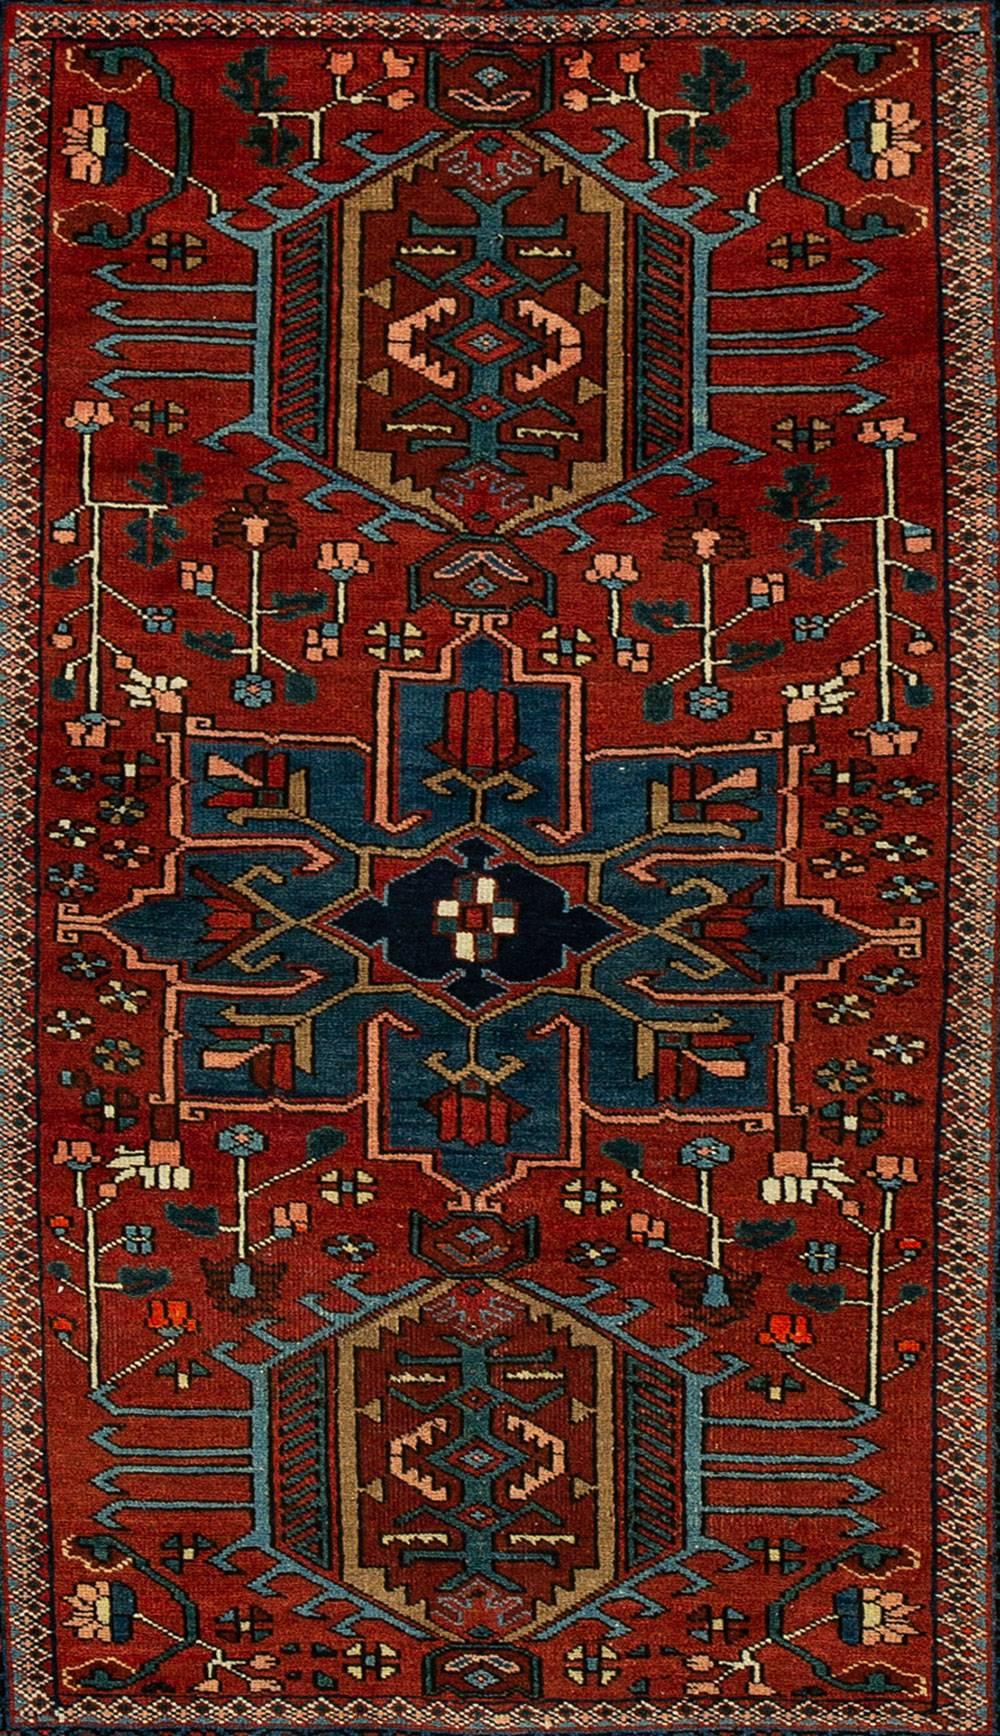 Wool Antique Red and Blue Persian Heriz Rug